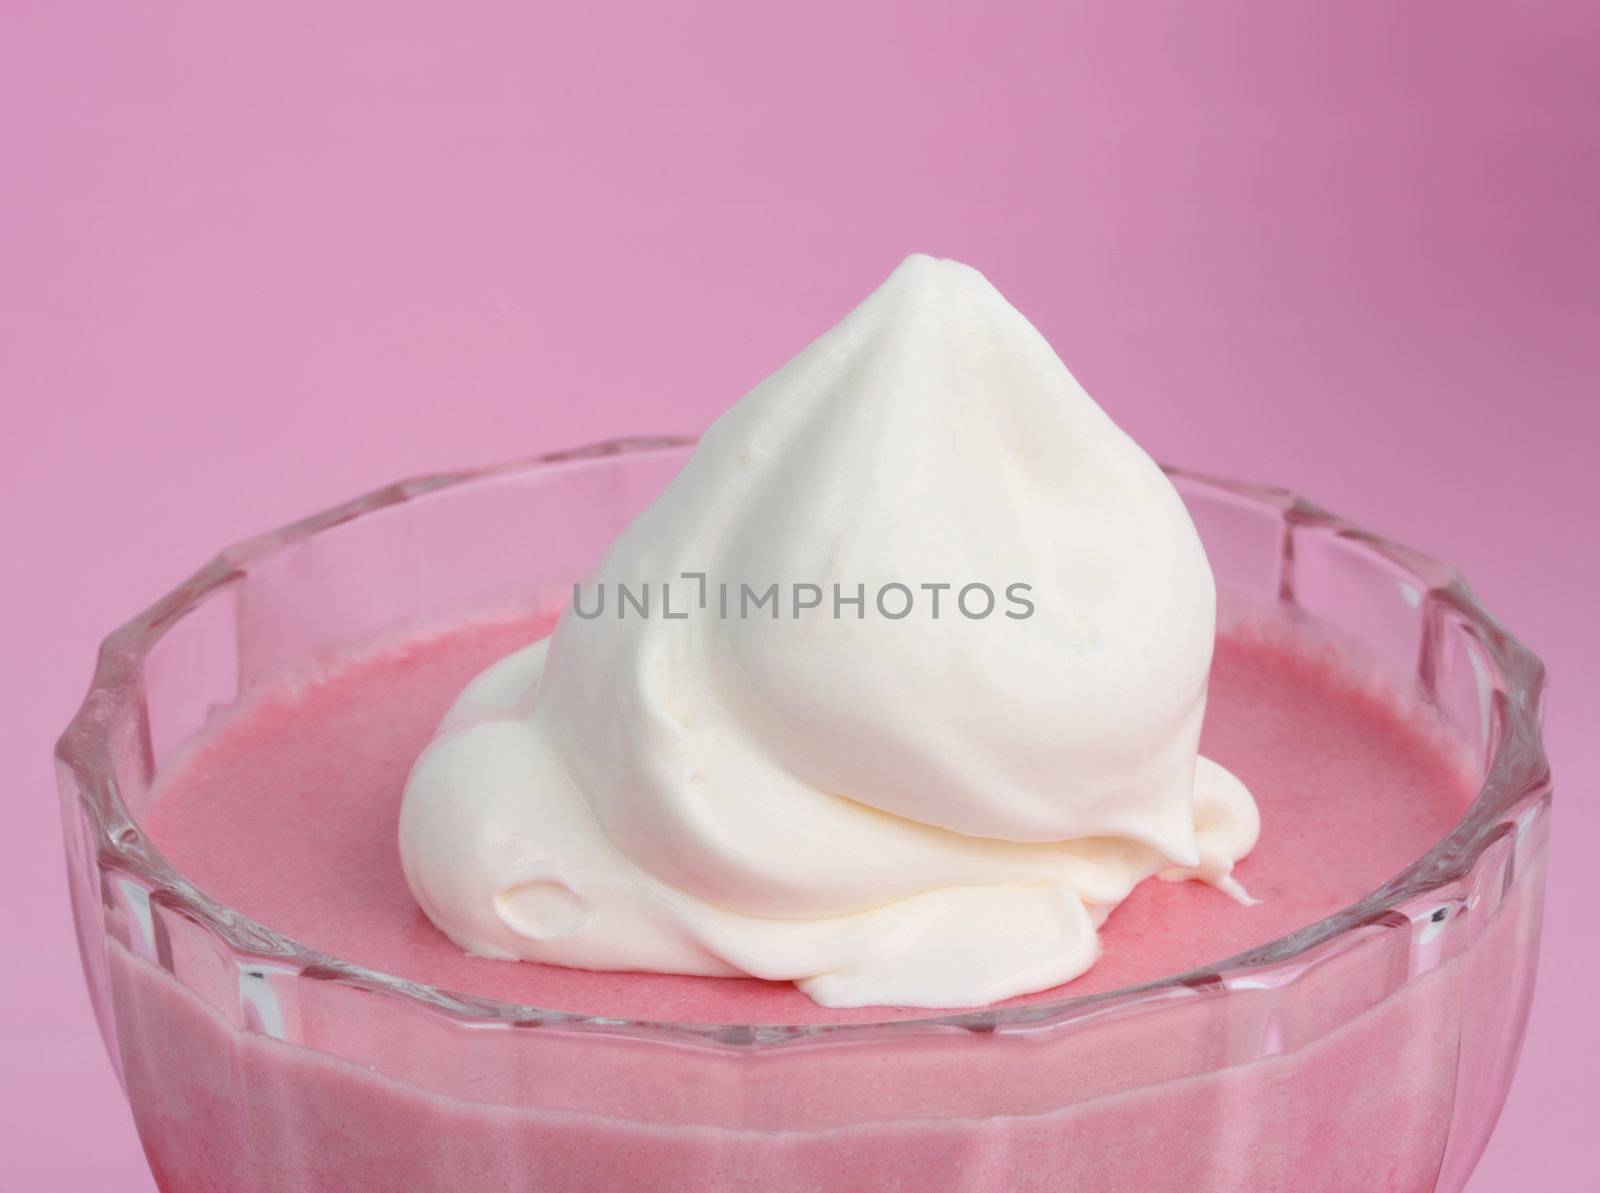 pink and white dessert by lanalanglois